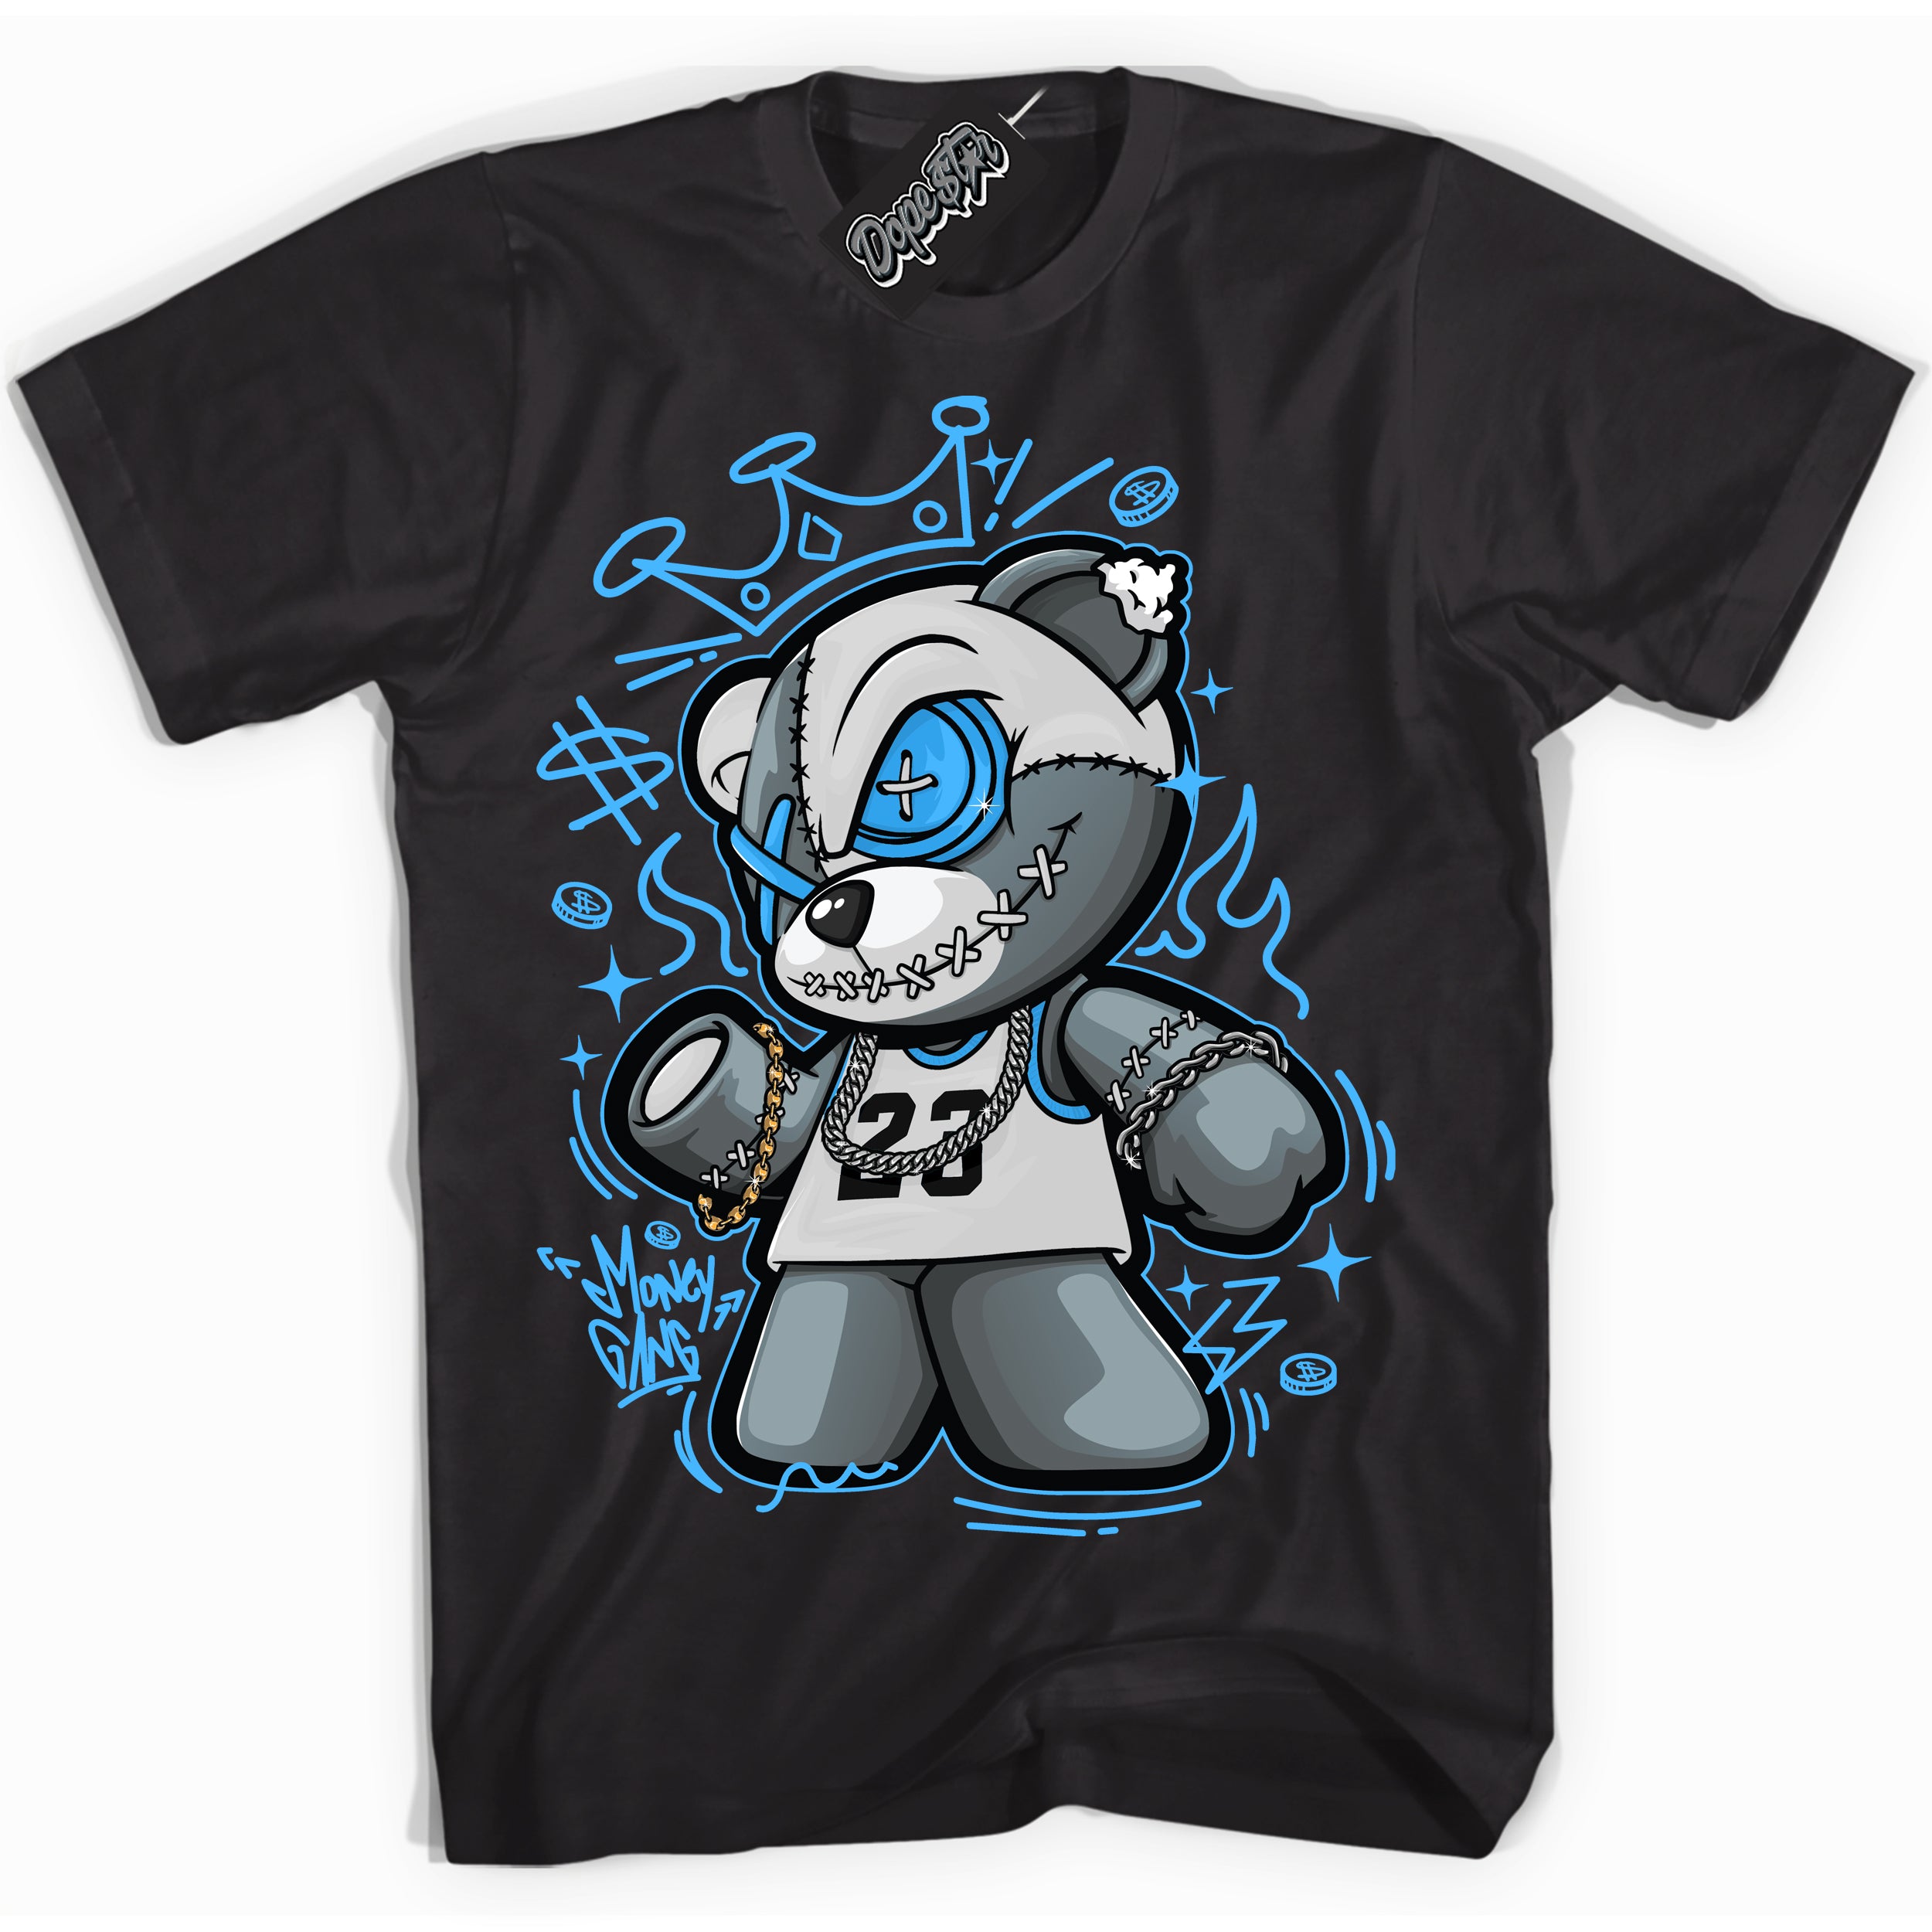 Cool Black graphic tee with “ Money Gang Bear ” design, that perfectly matches Powder Blue 9s sneakers 